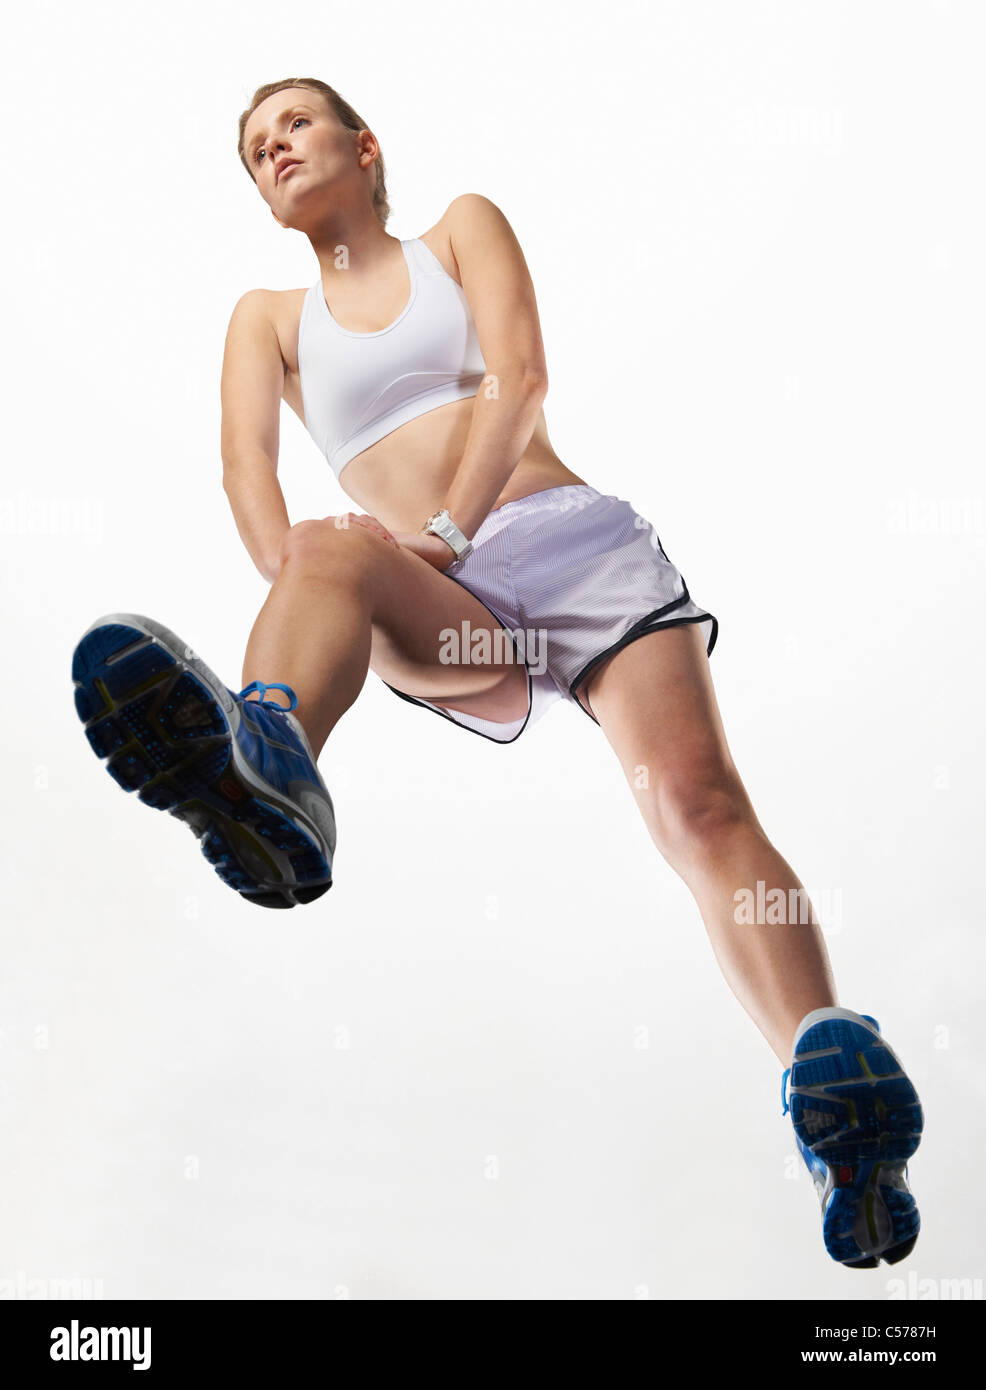 Low angle view of woman stretching Stock Photo